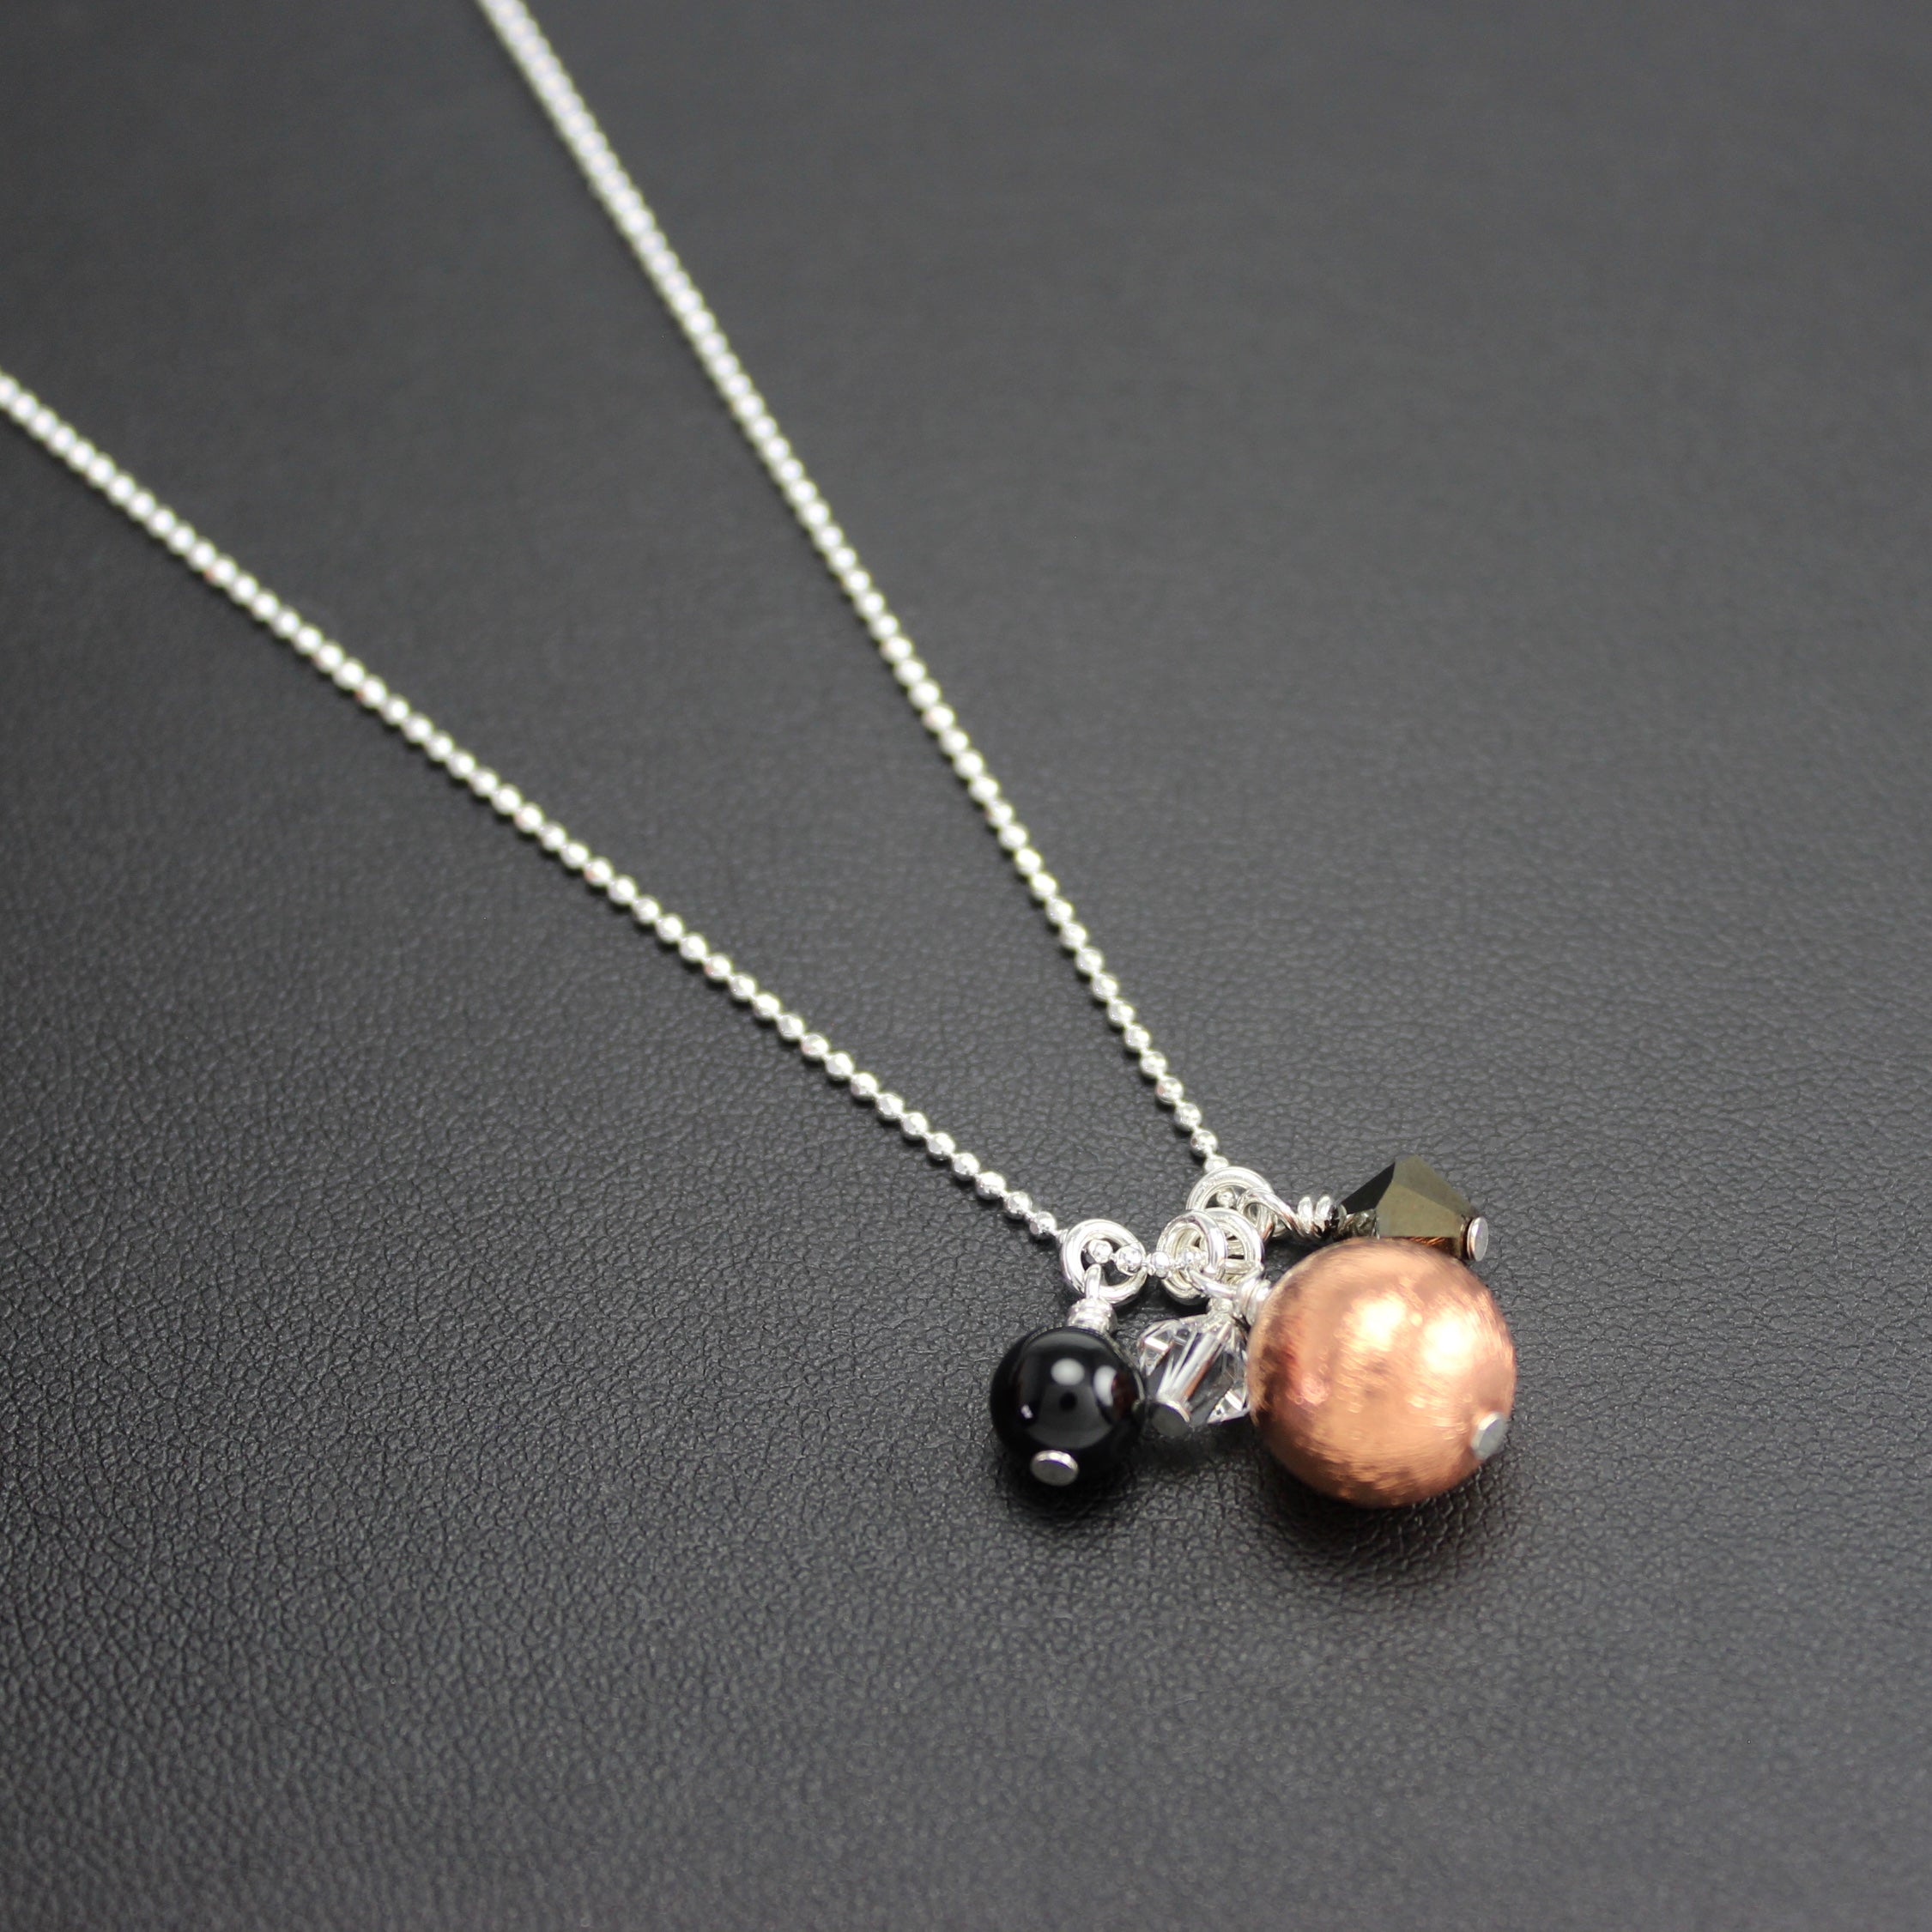 Bolero Cluster Necklace with Copper, Black Onyx and Crystal